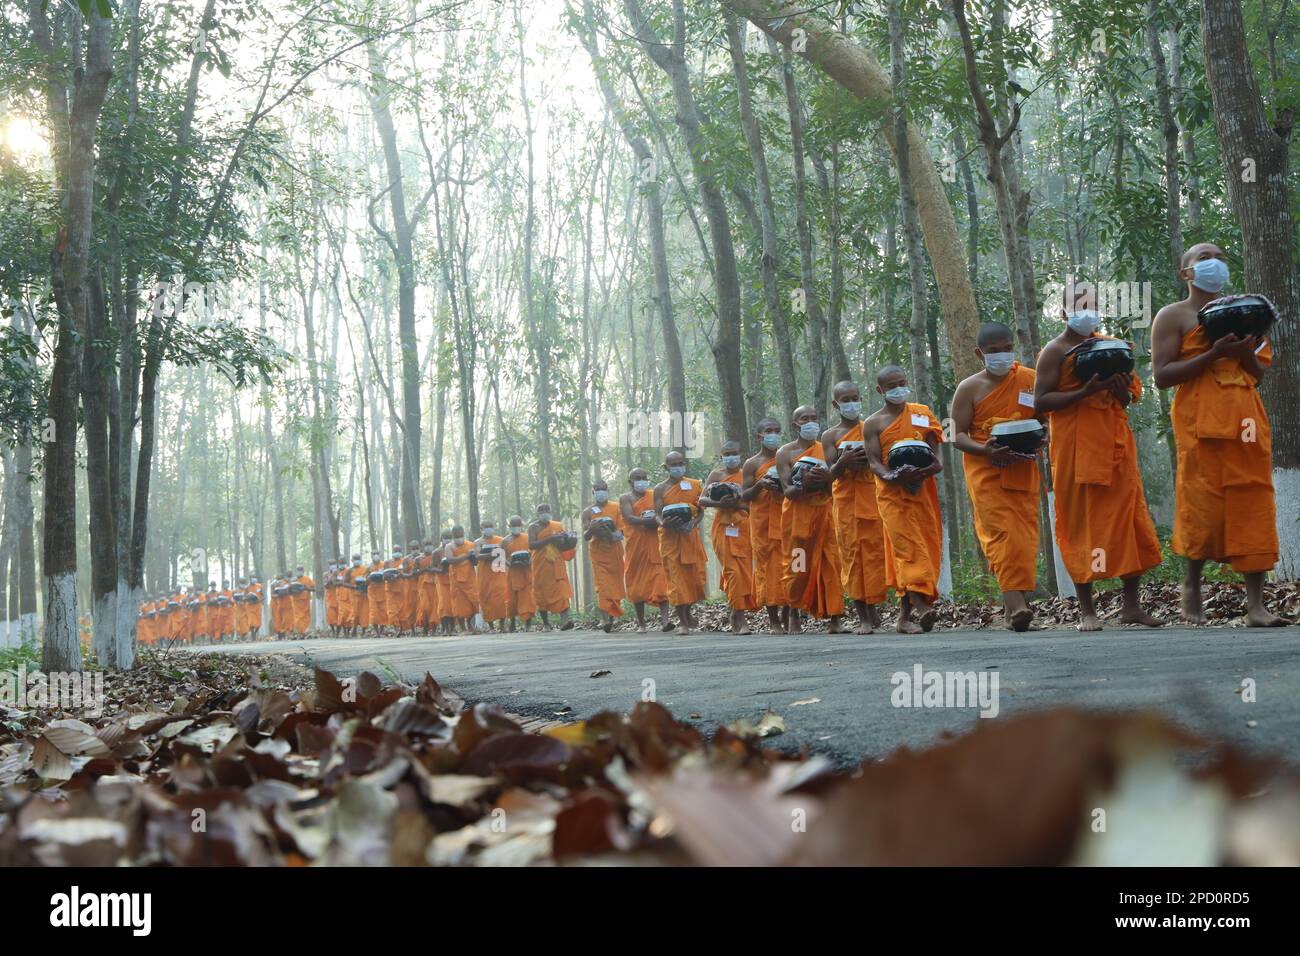 Theravada Buddhism: The monks going to take their alms food in the early morning, Khagrachari, Bangladesh. Stock Photo